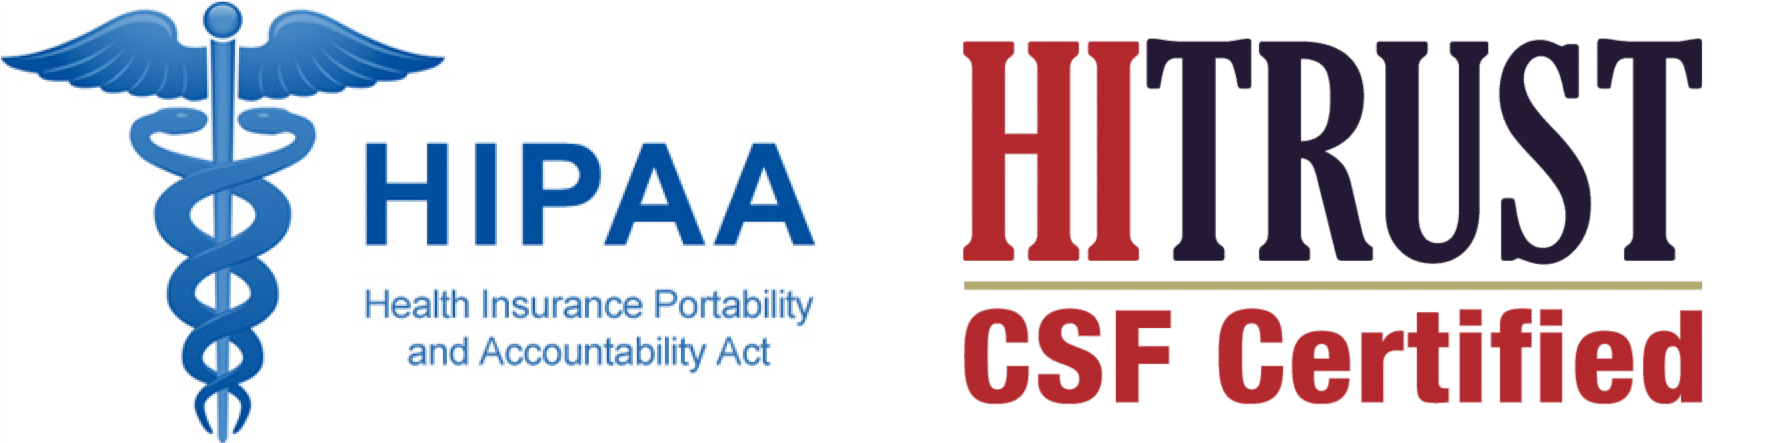 HIPAA-compliant, HITRUST certified, and secure.